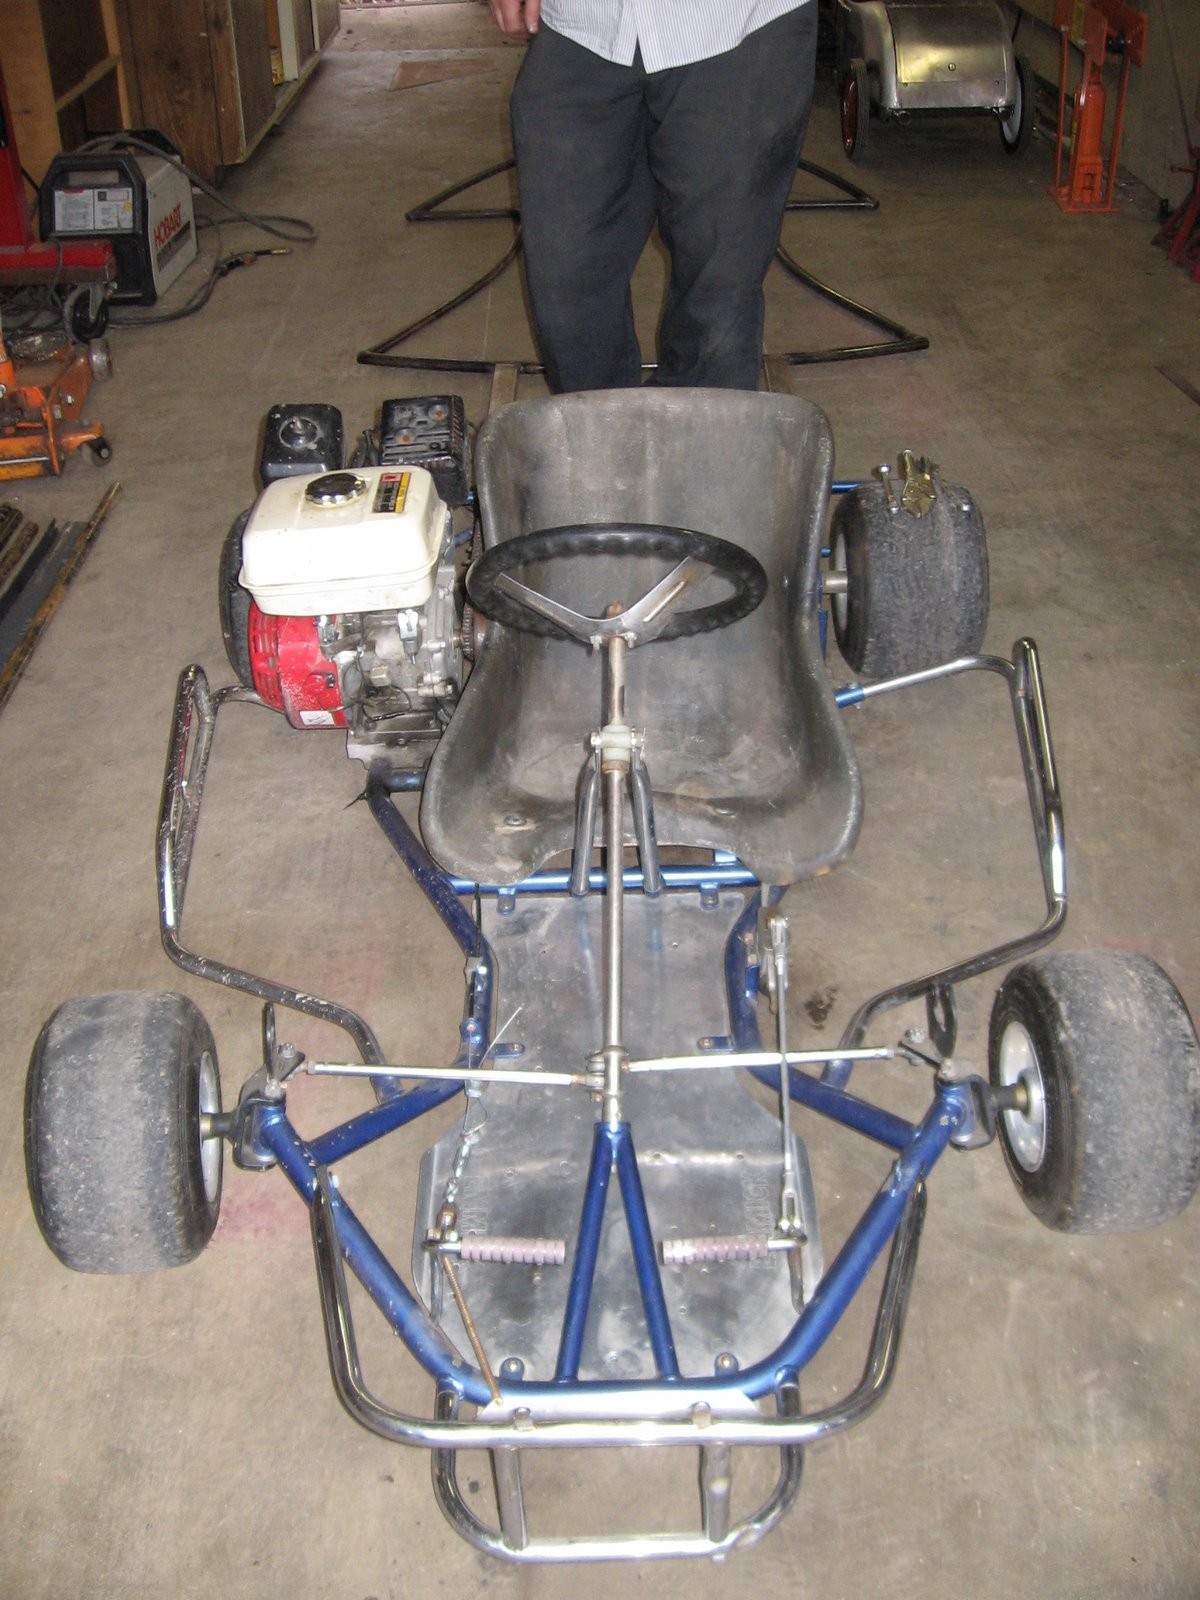 The scrapped go kart